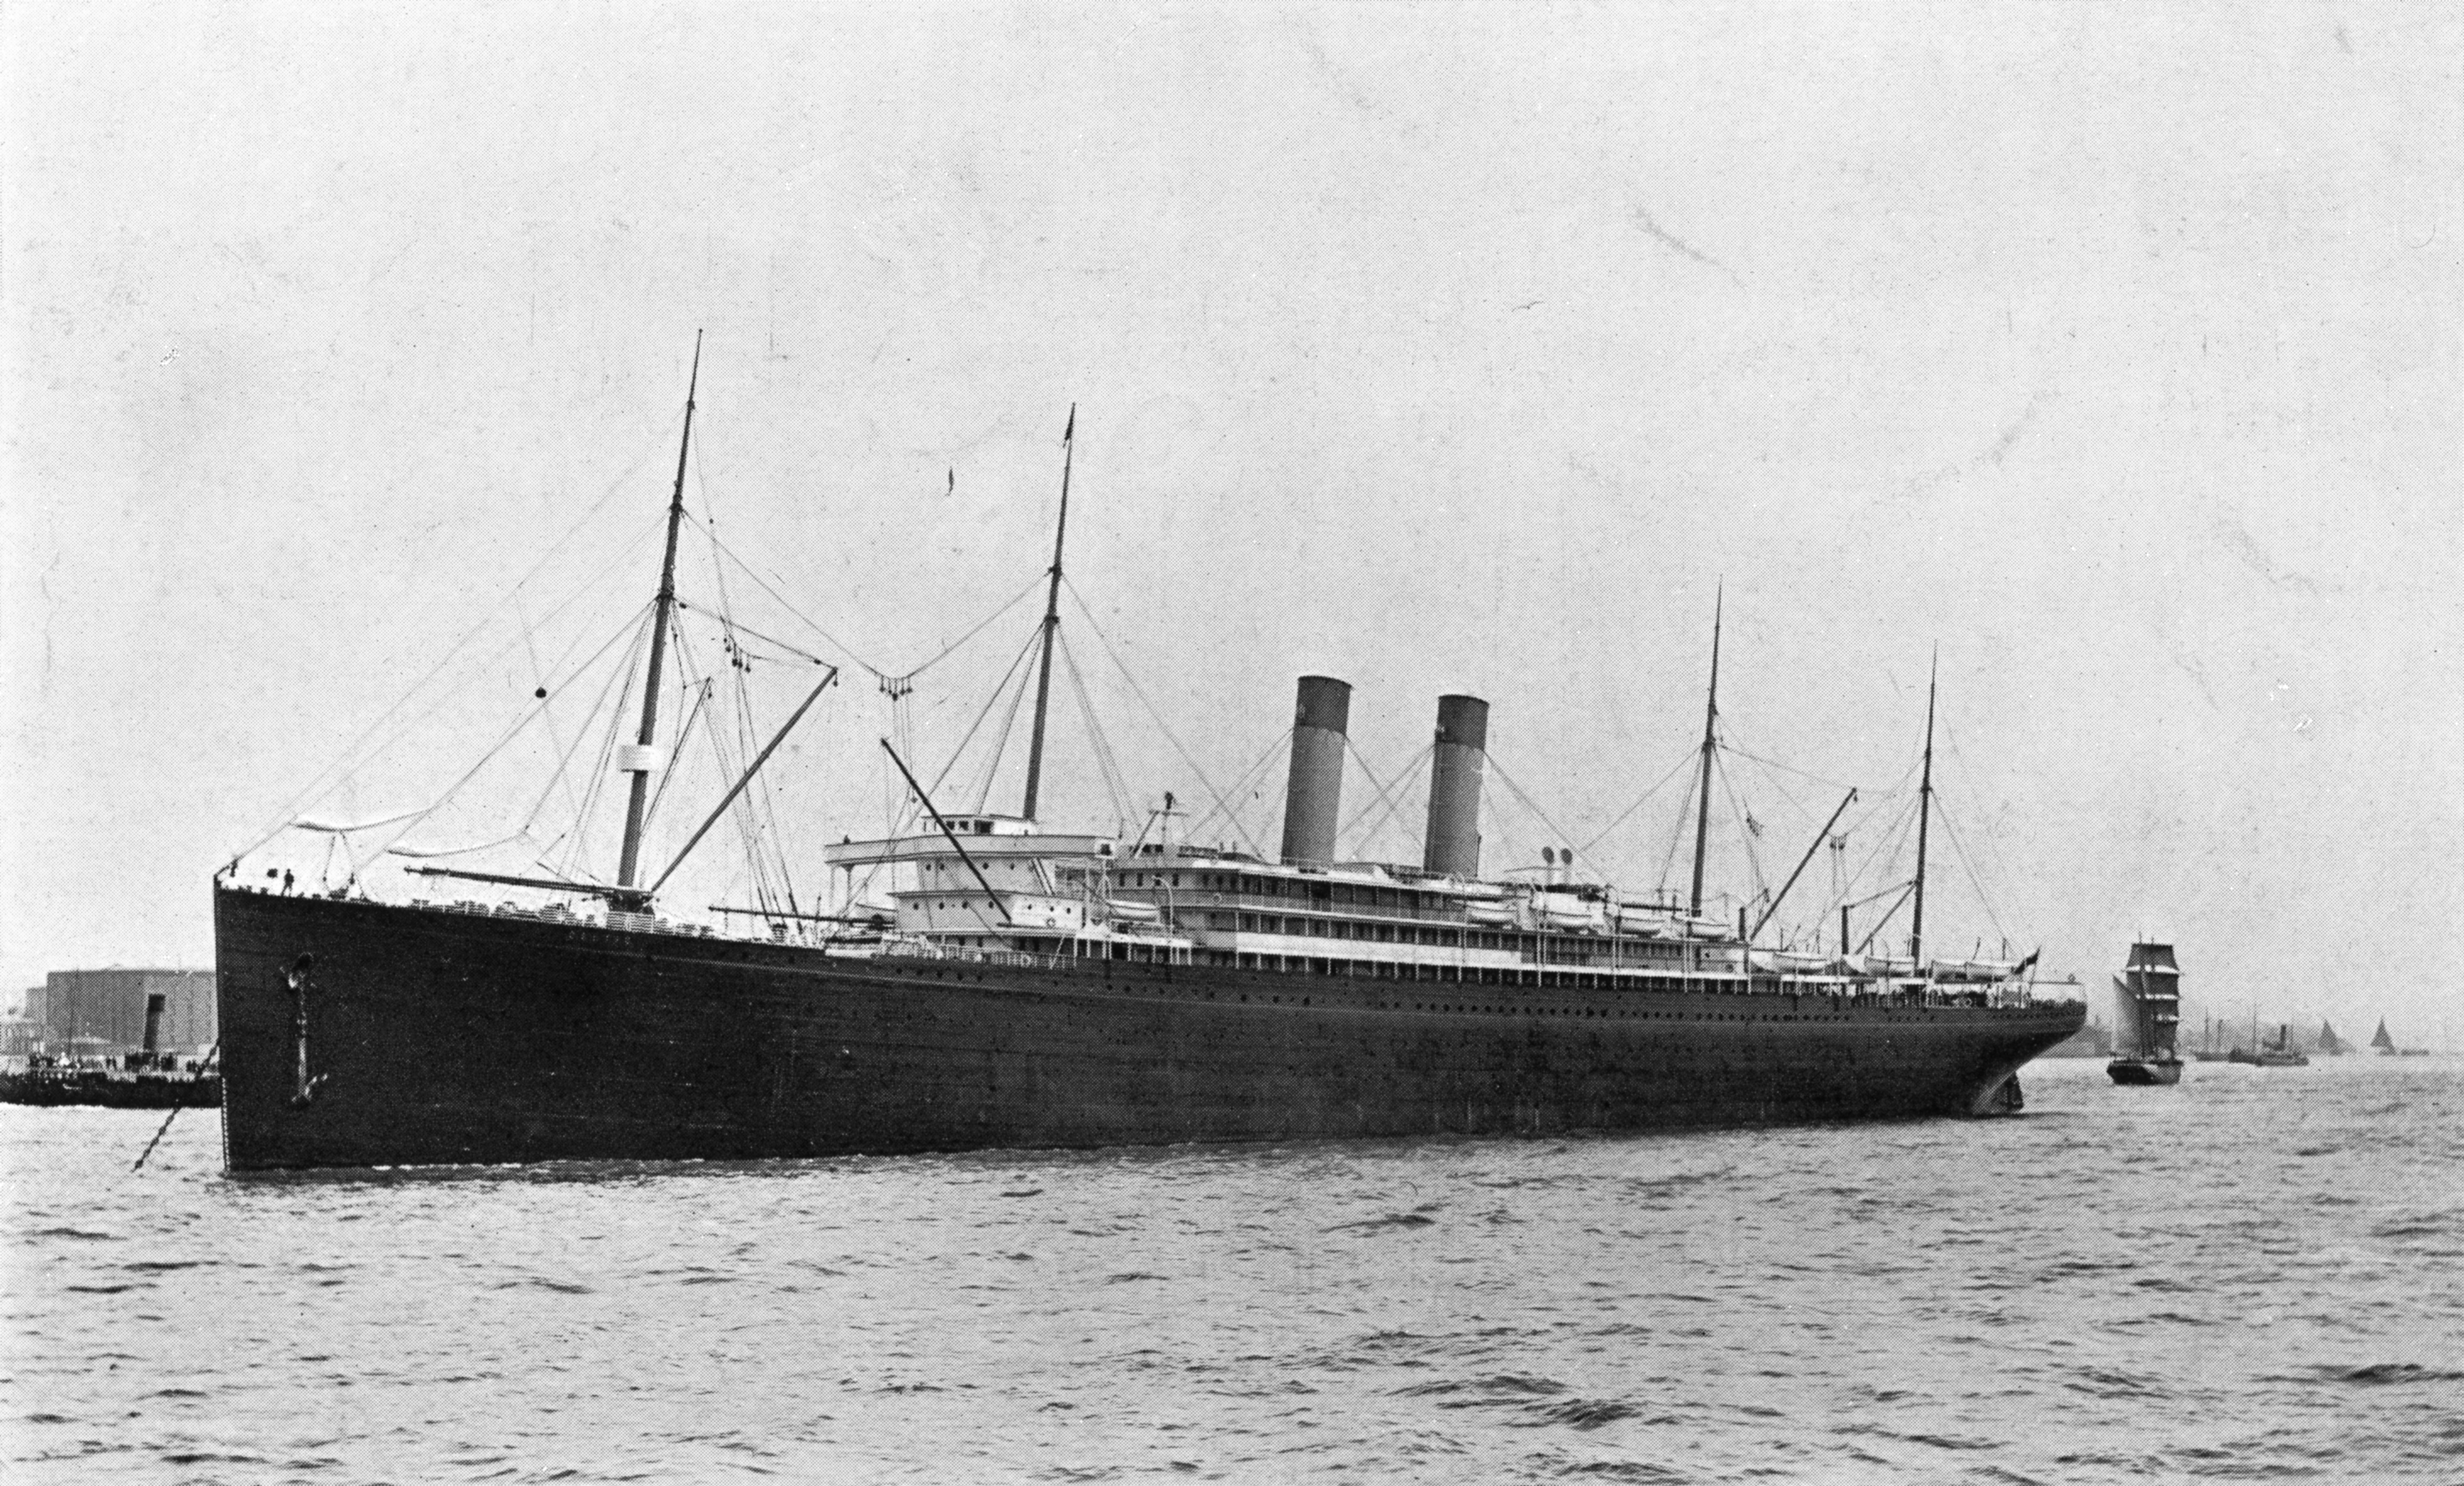 The RMS Celtic appears in this black and white photograph circa 1913 with two smoke stacks, four masts, and a long black hull angled towards the left side of the frame sailing towards, but past the viewer.